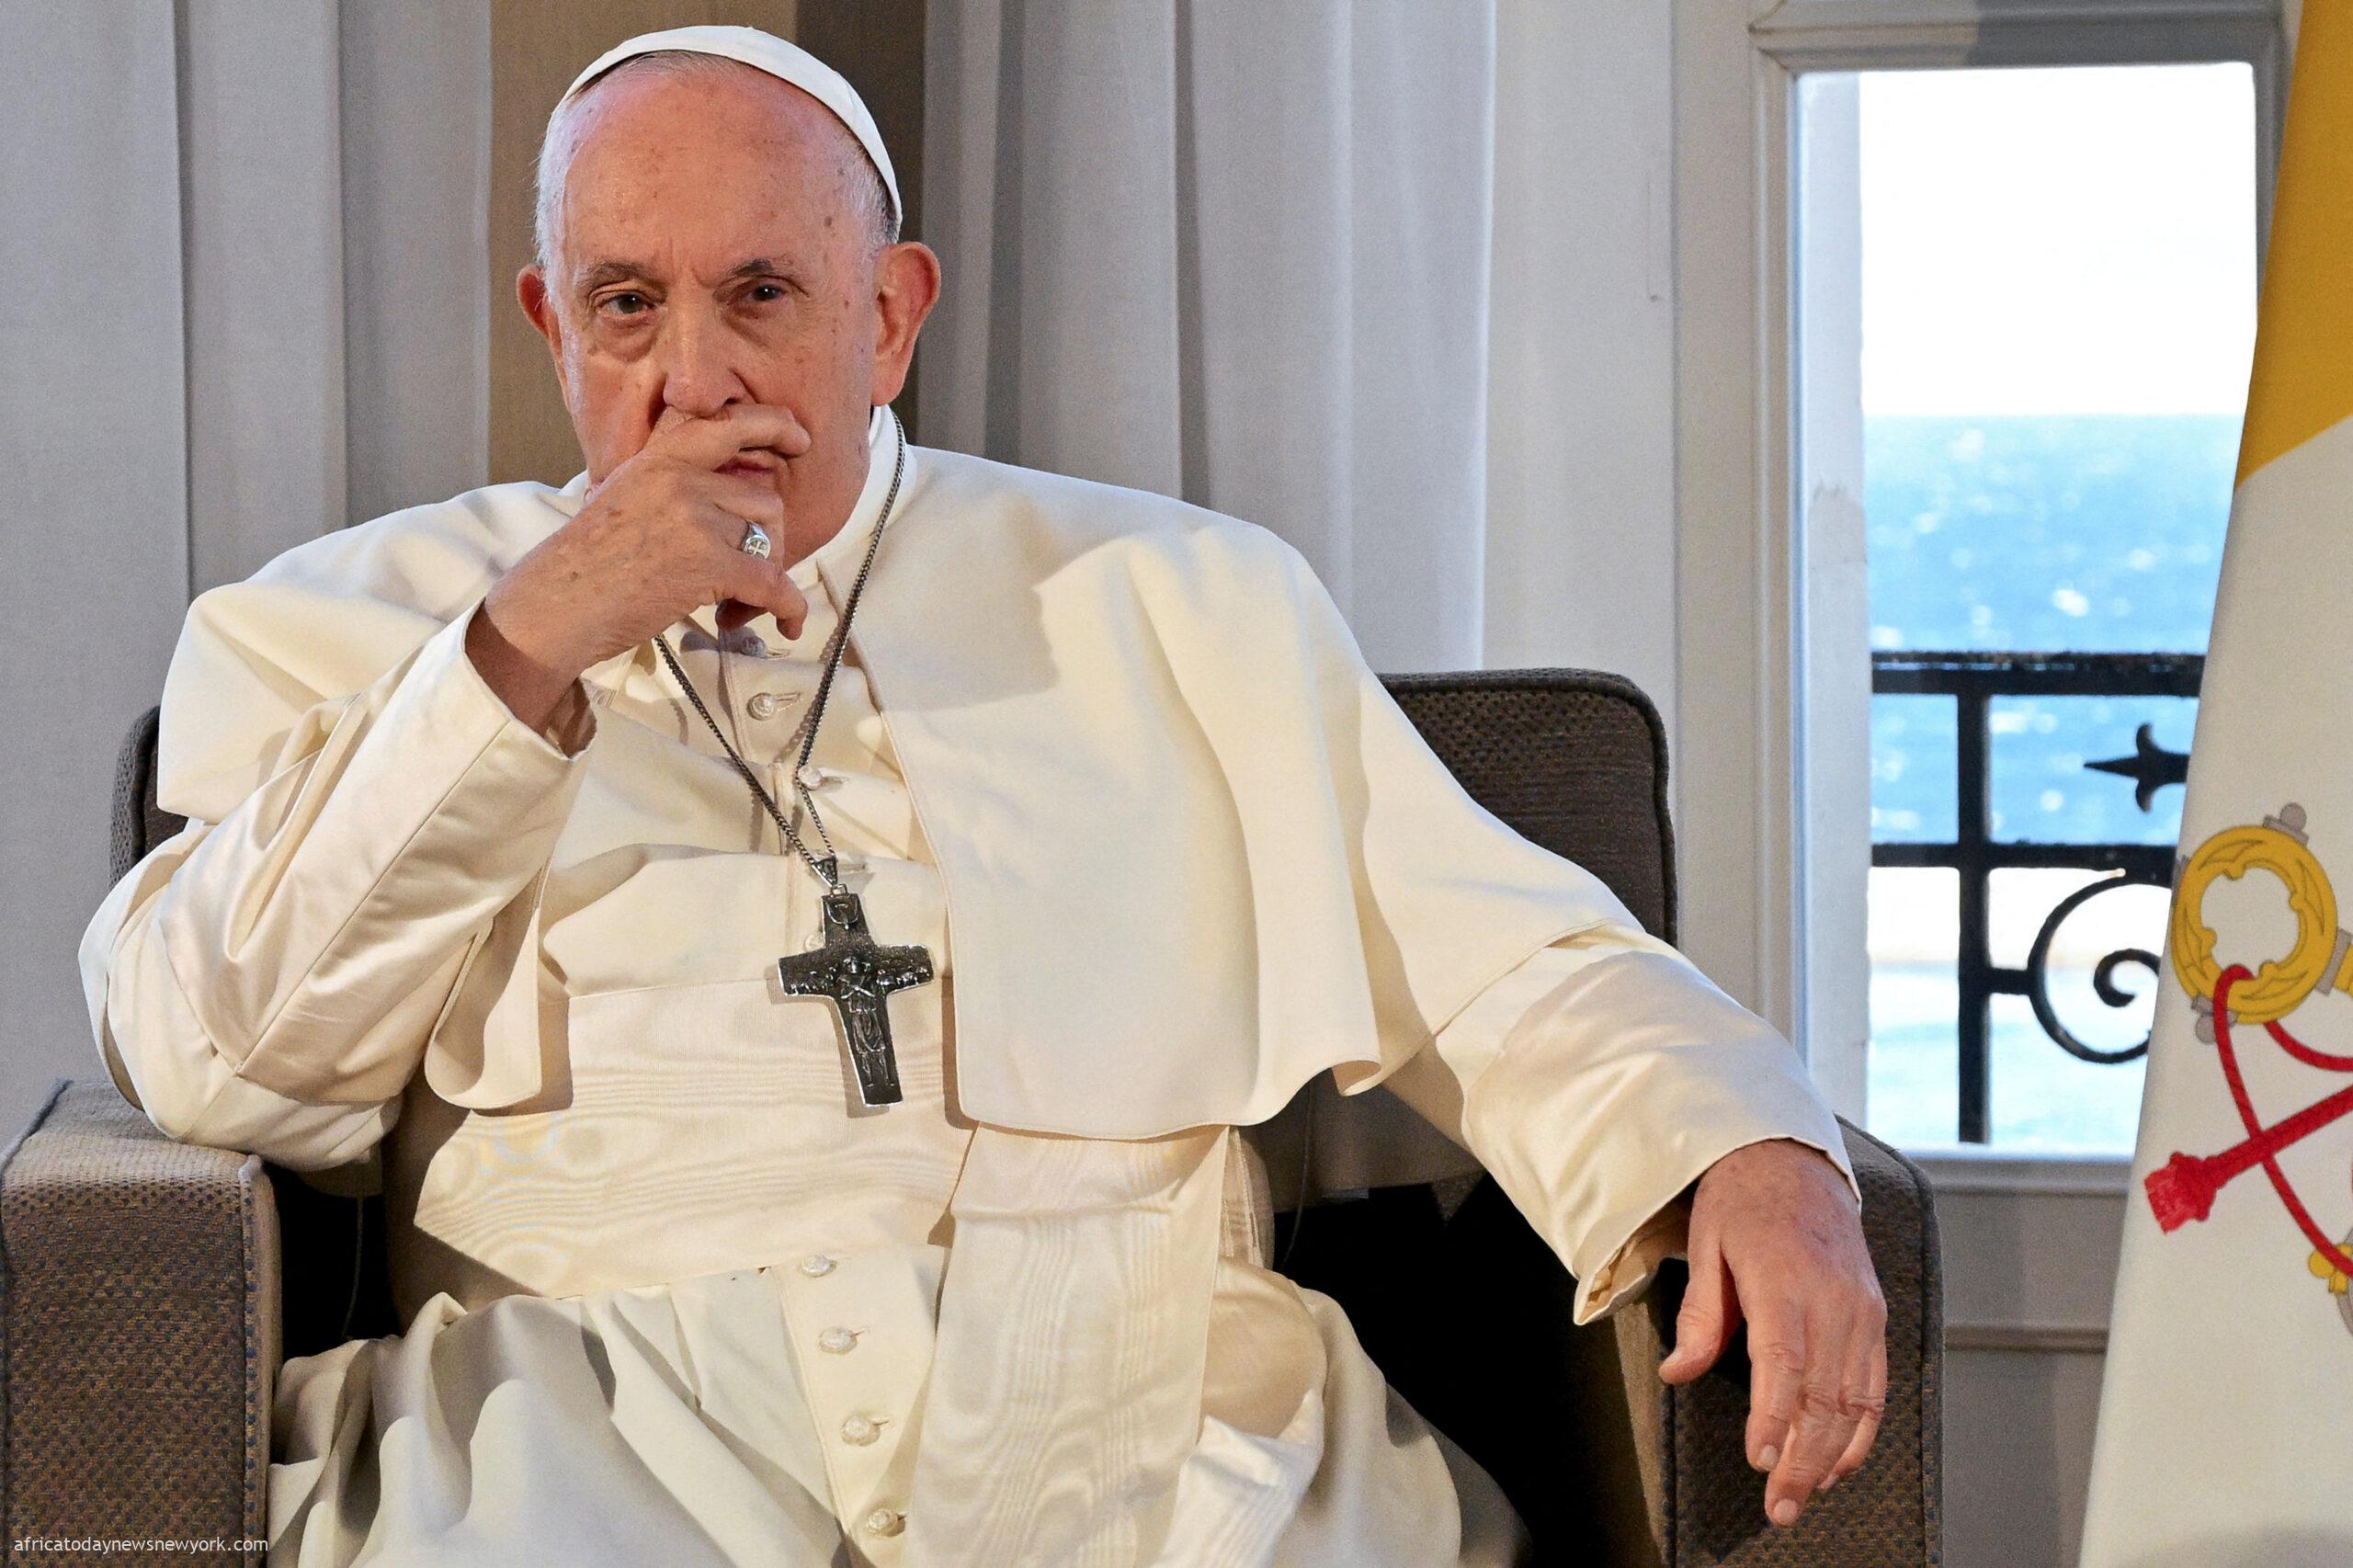 Reactions As Pope 'Authorises' Blessings For Same-sex Couples